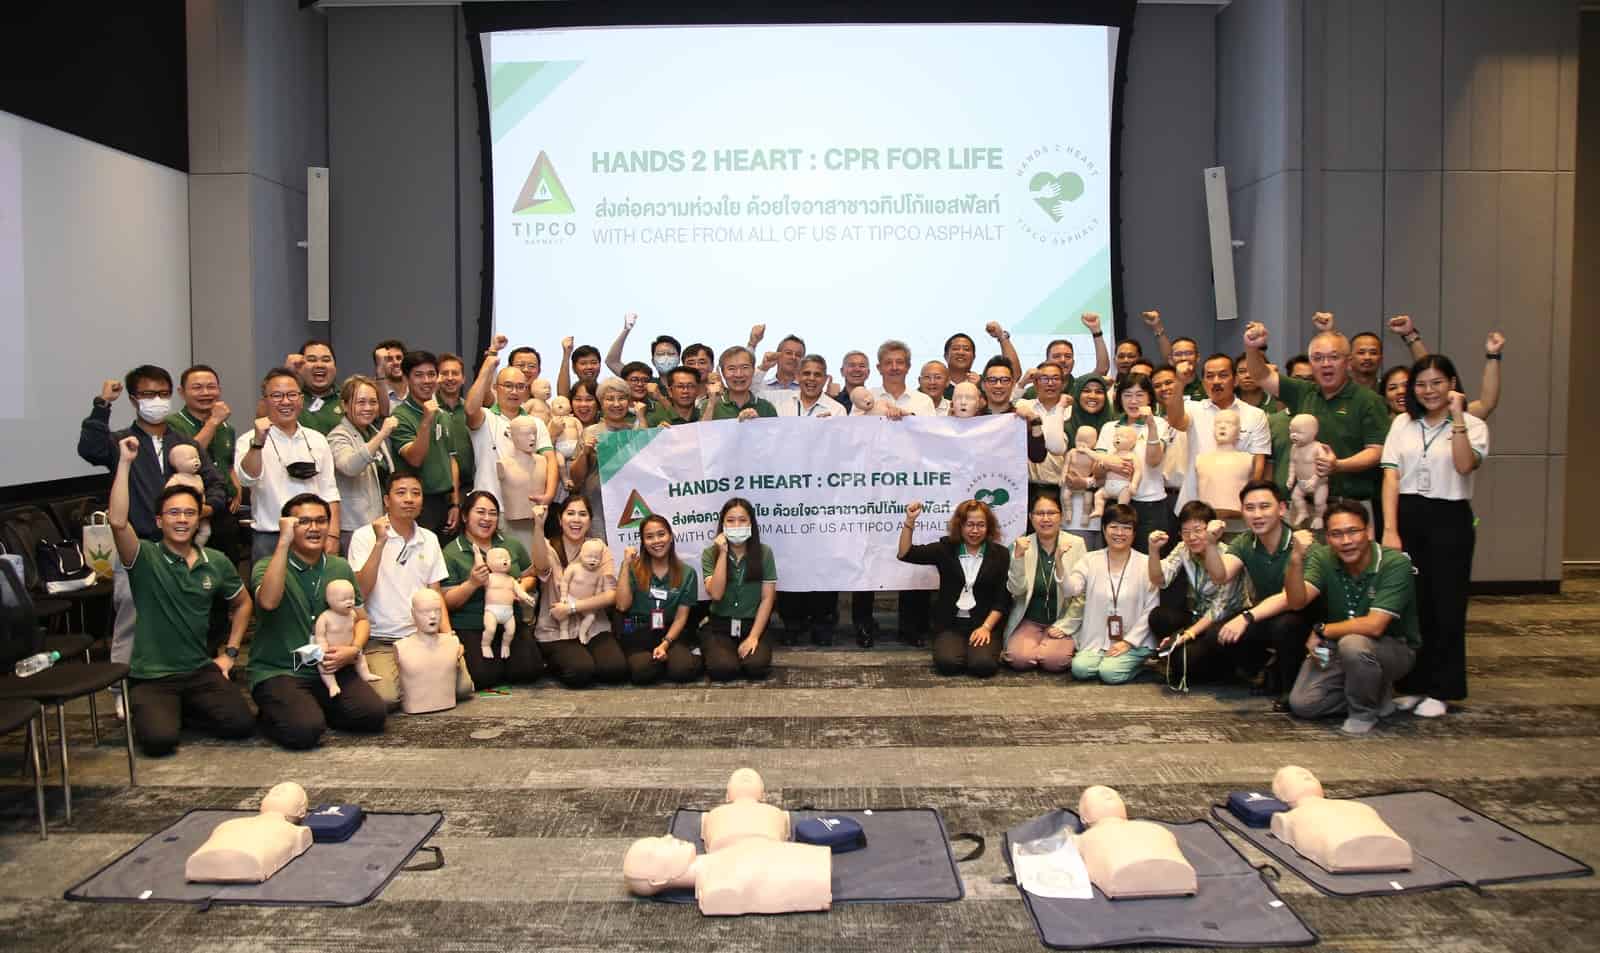 Hands 2 Heart CPR for Life